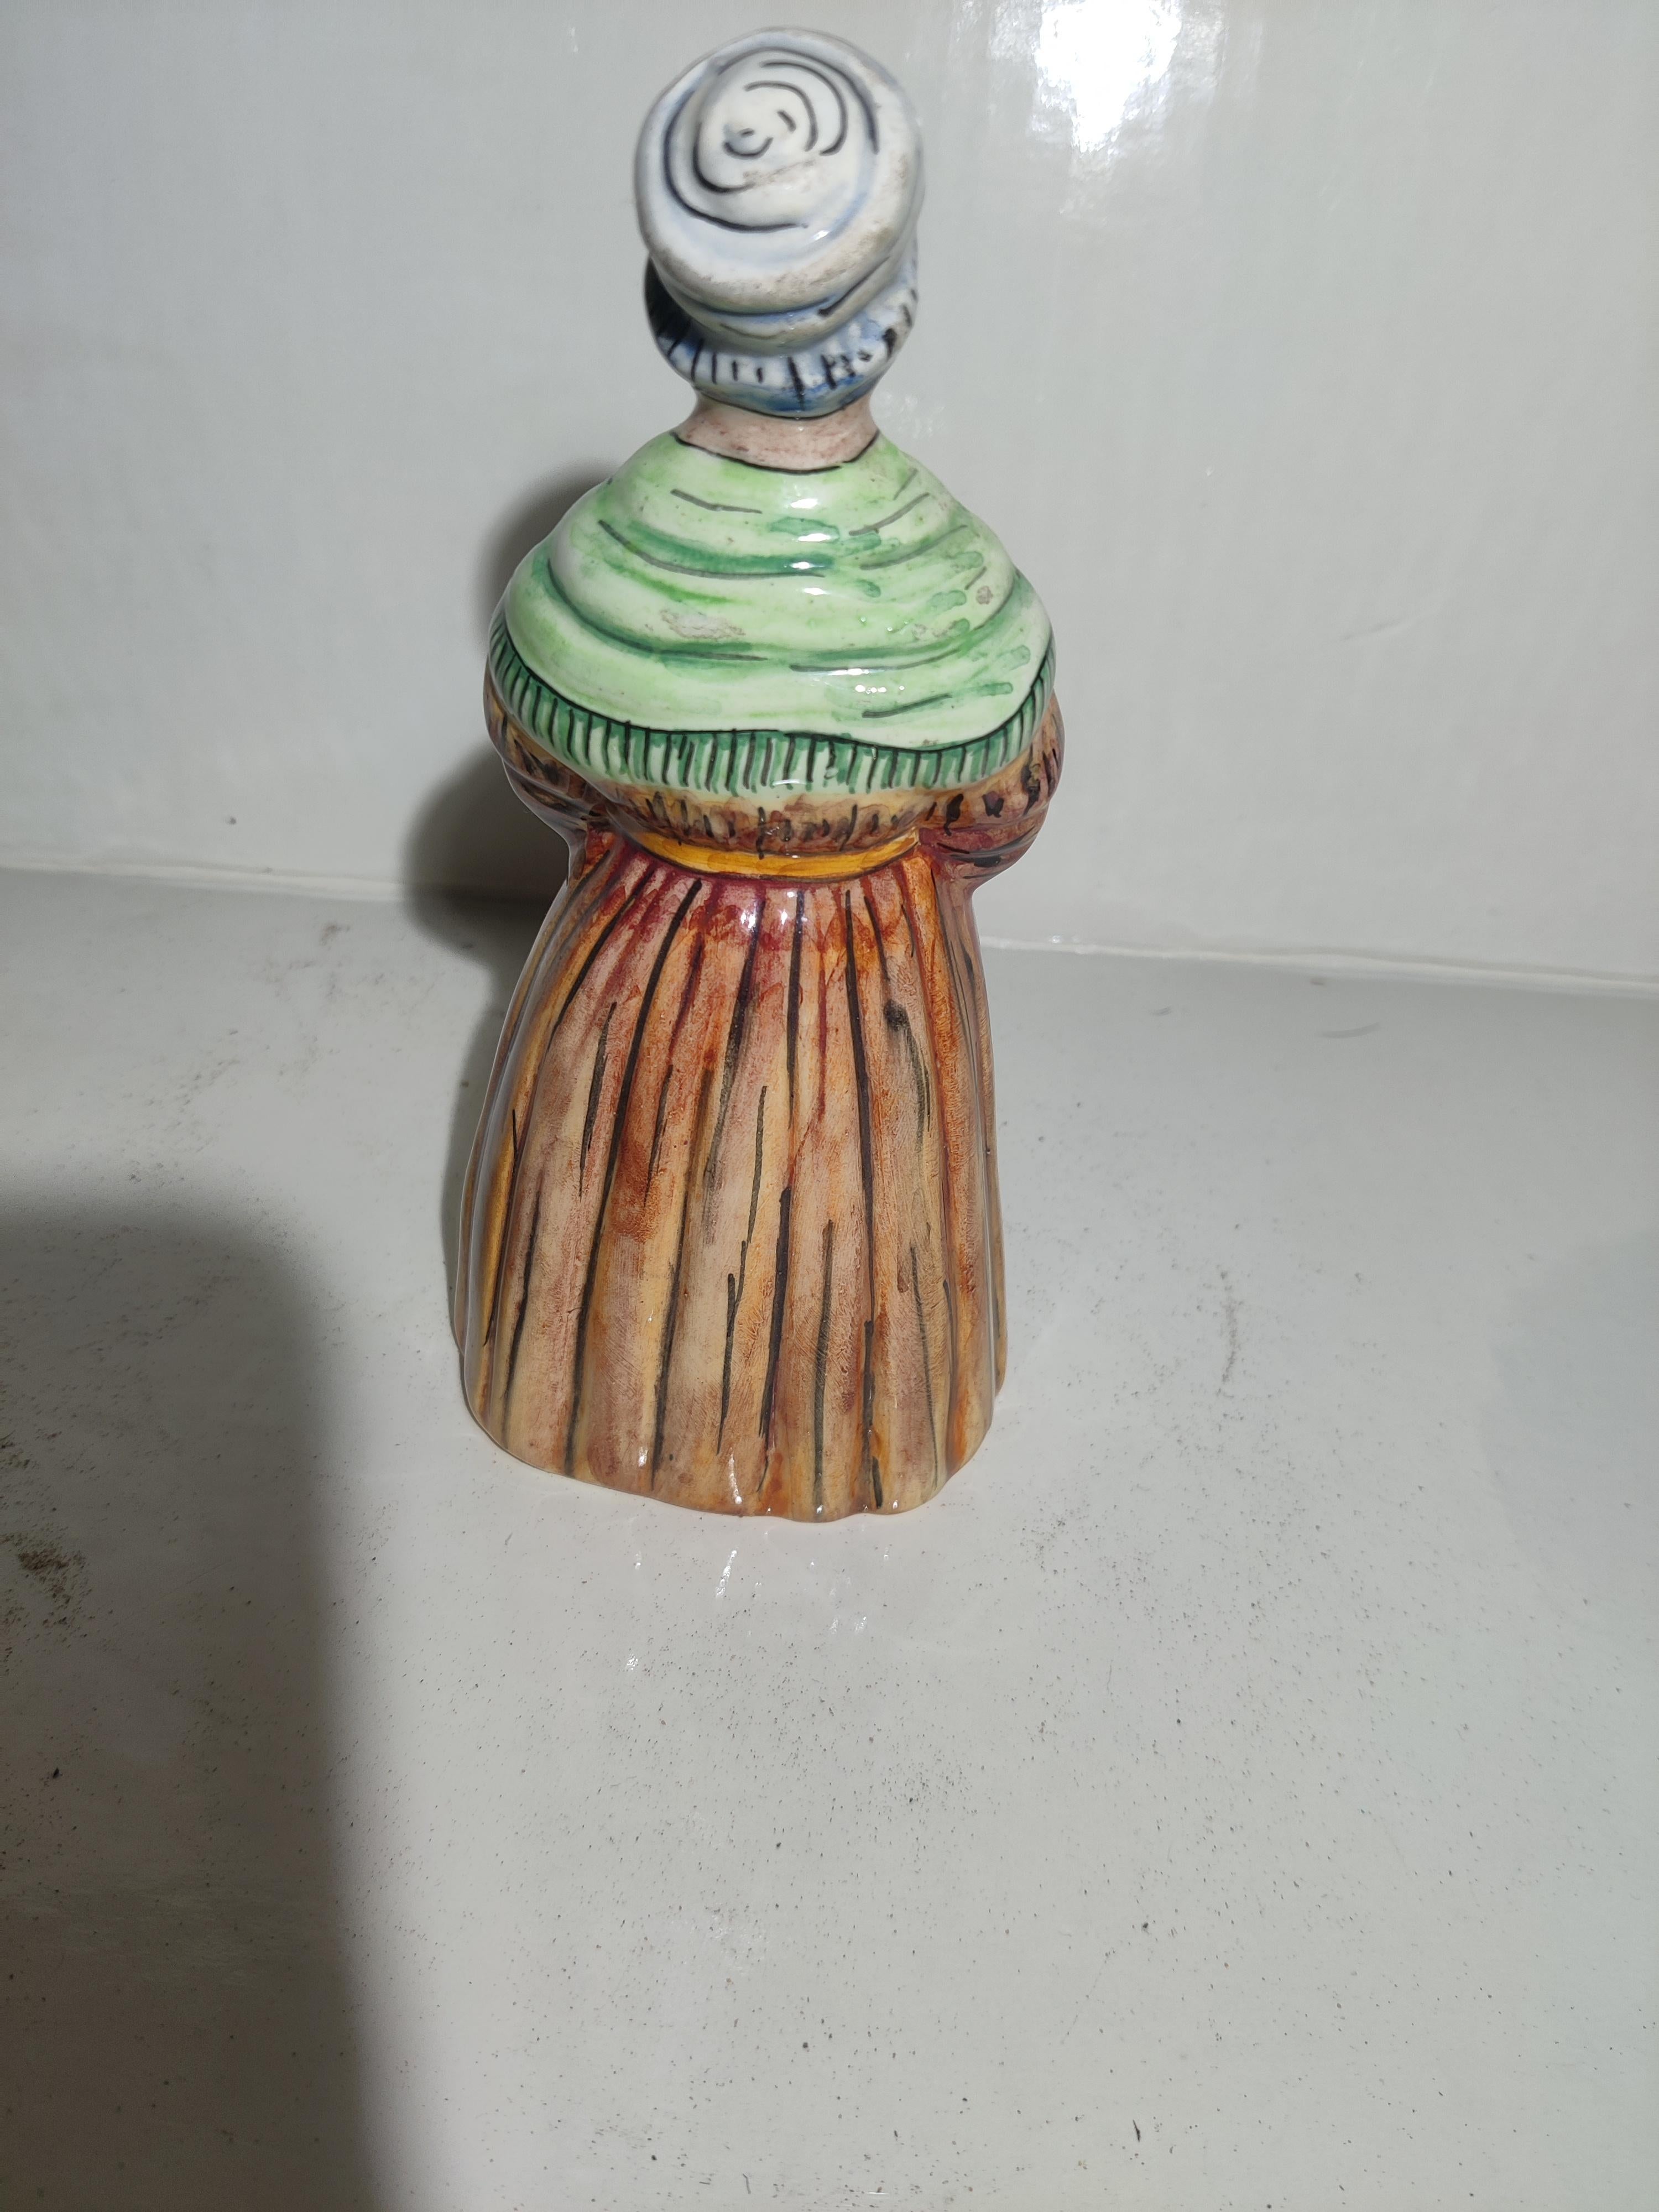 French Faience Majolica Dinner Bell.
Peasant Woman with hands in apron pocket. 
With working clapper.
No chips or other damage. 